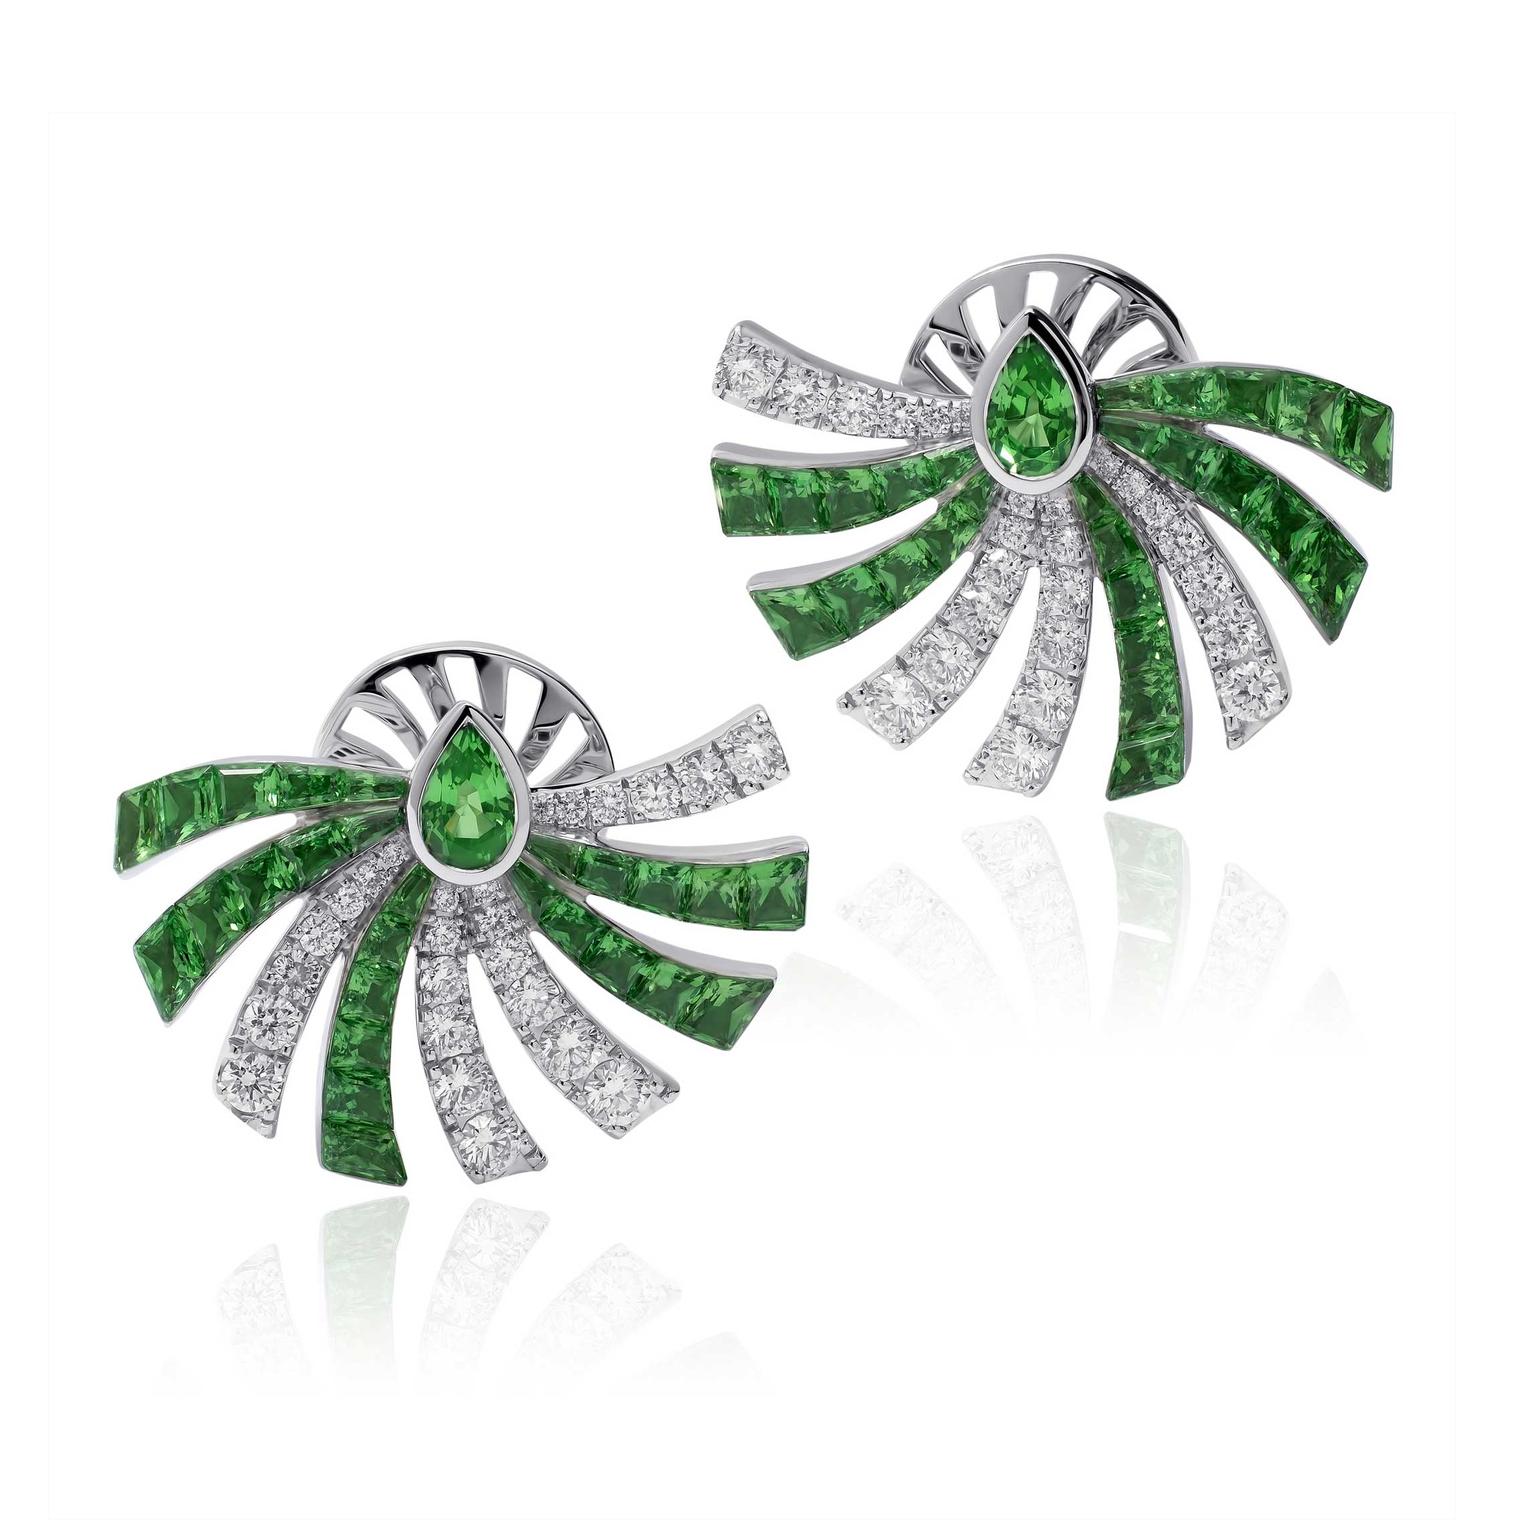 Stenzhorn Persuasion stud earrings in white gold with tsavorites and diamonds